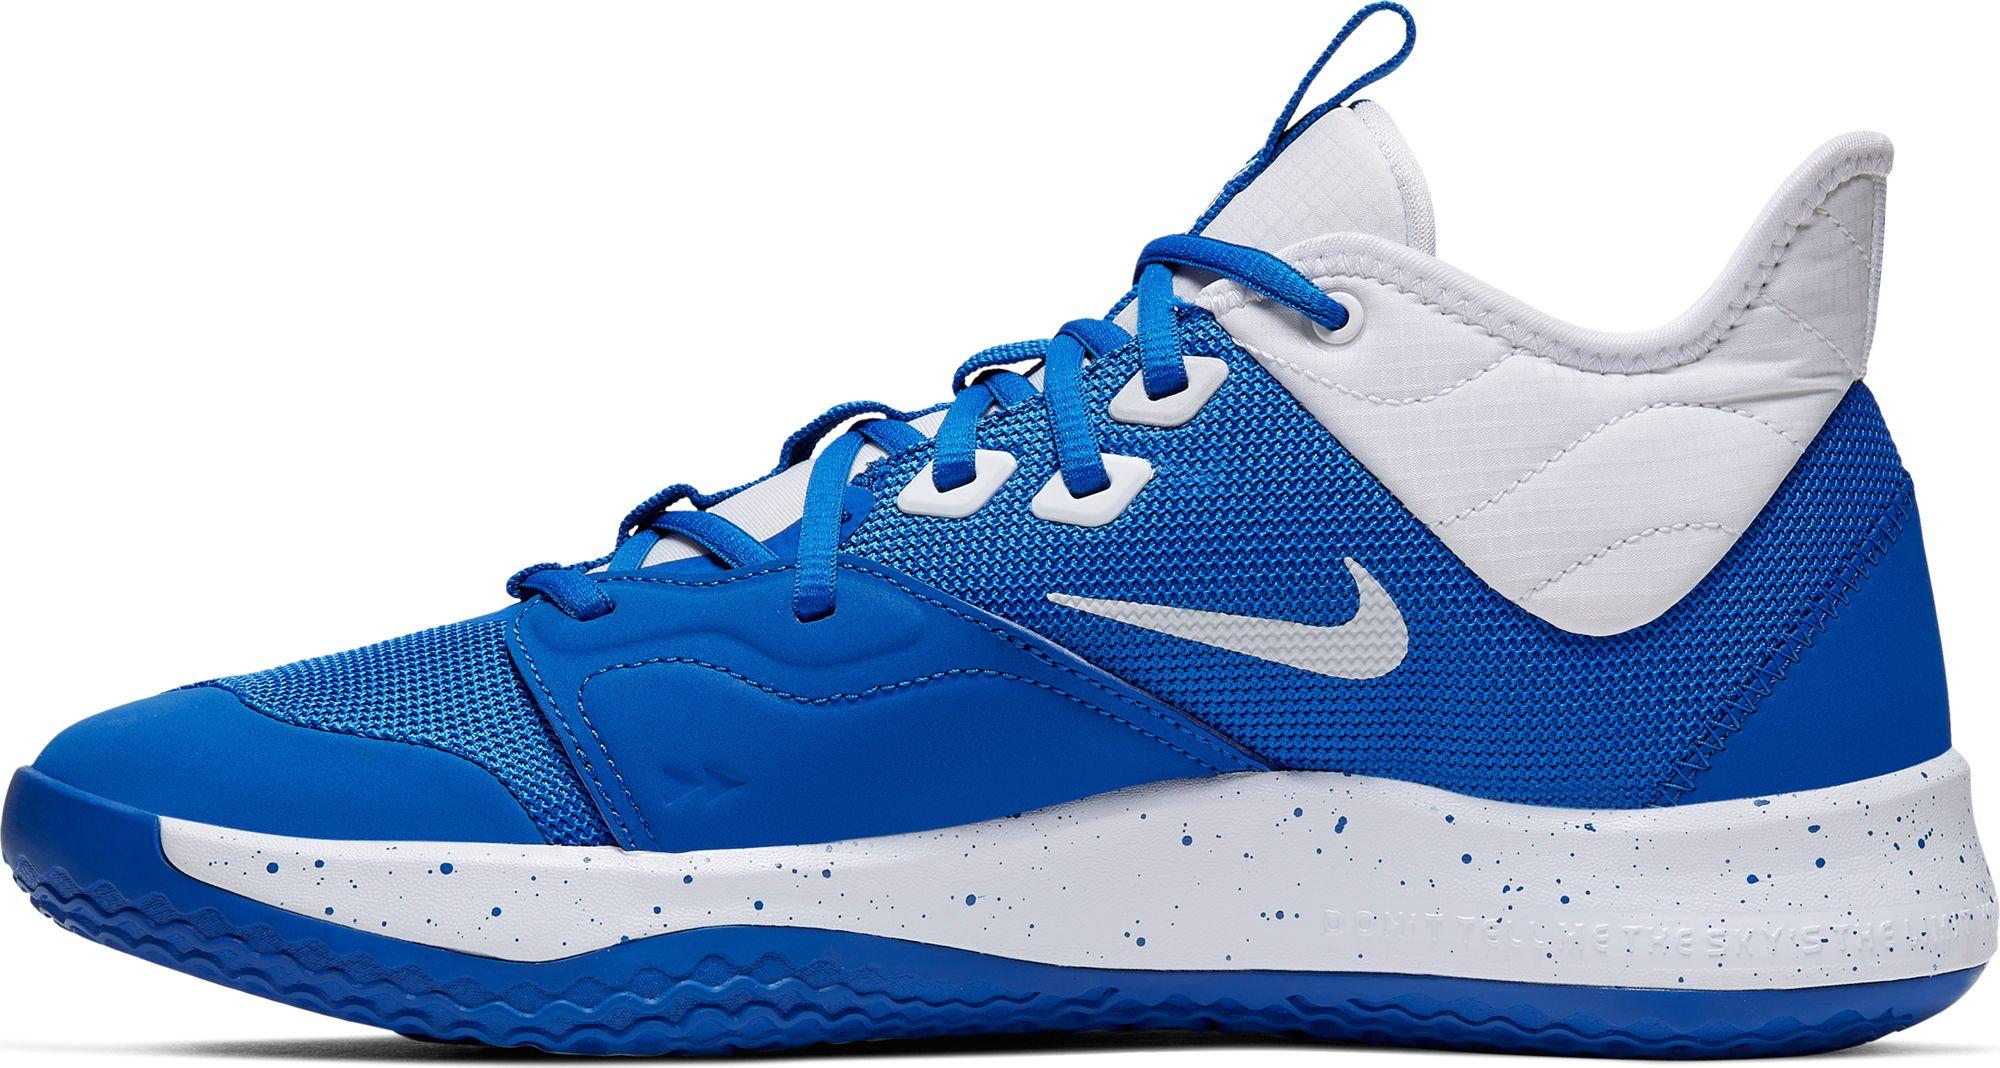 Nike Pg3 Basketball Shoes in Blue/White 